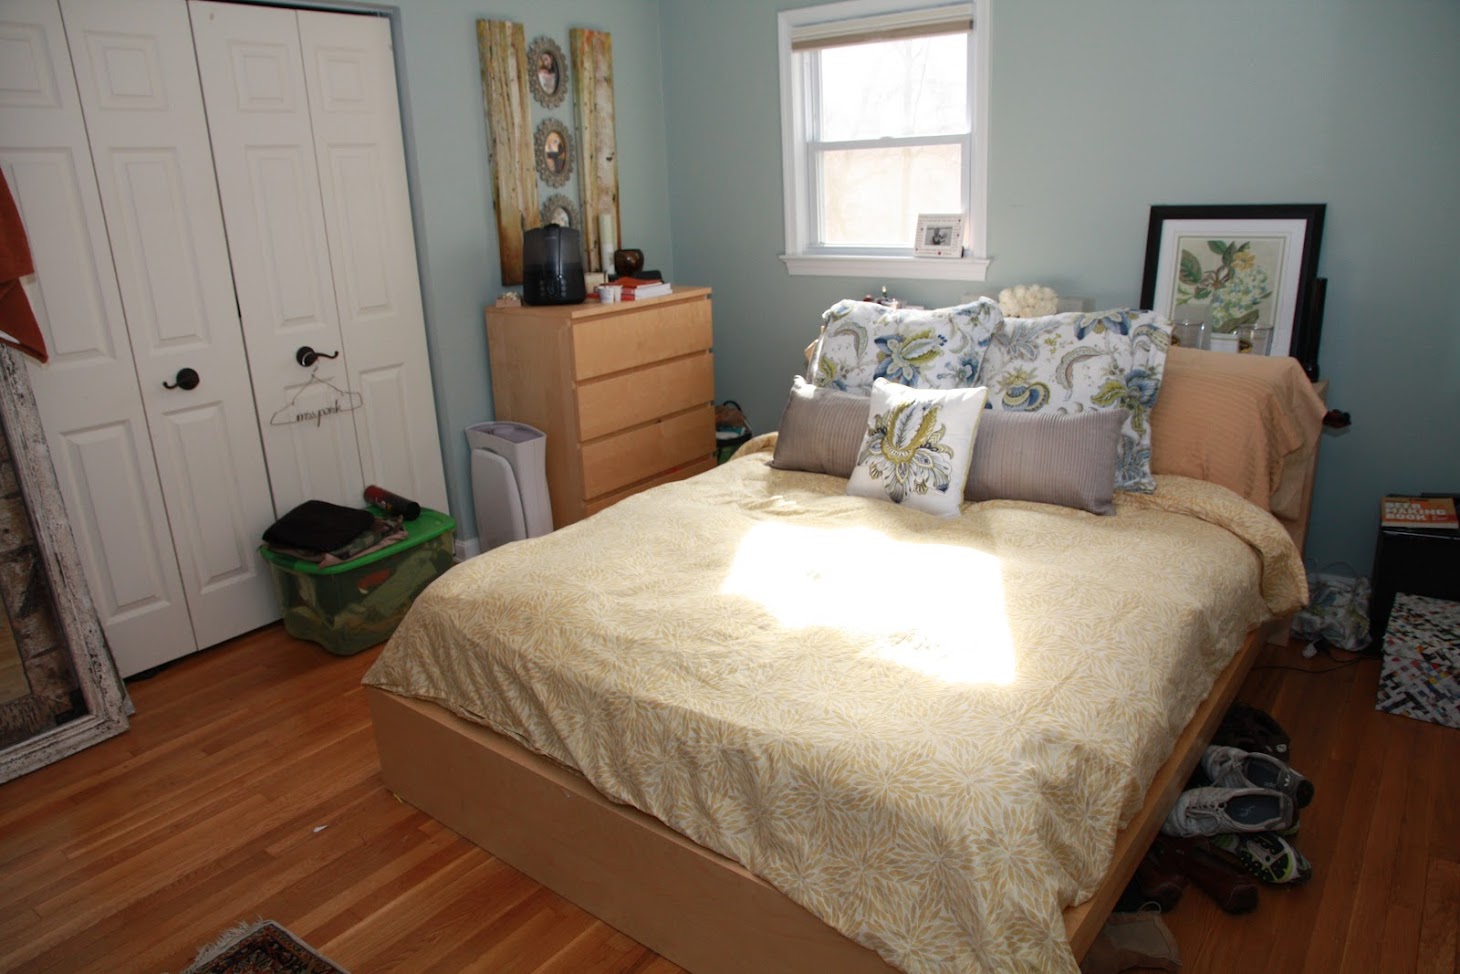 Food, Laughter and Happily Ever After: Master Bedroom  